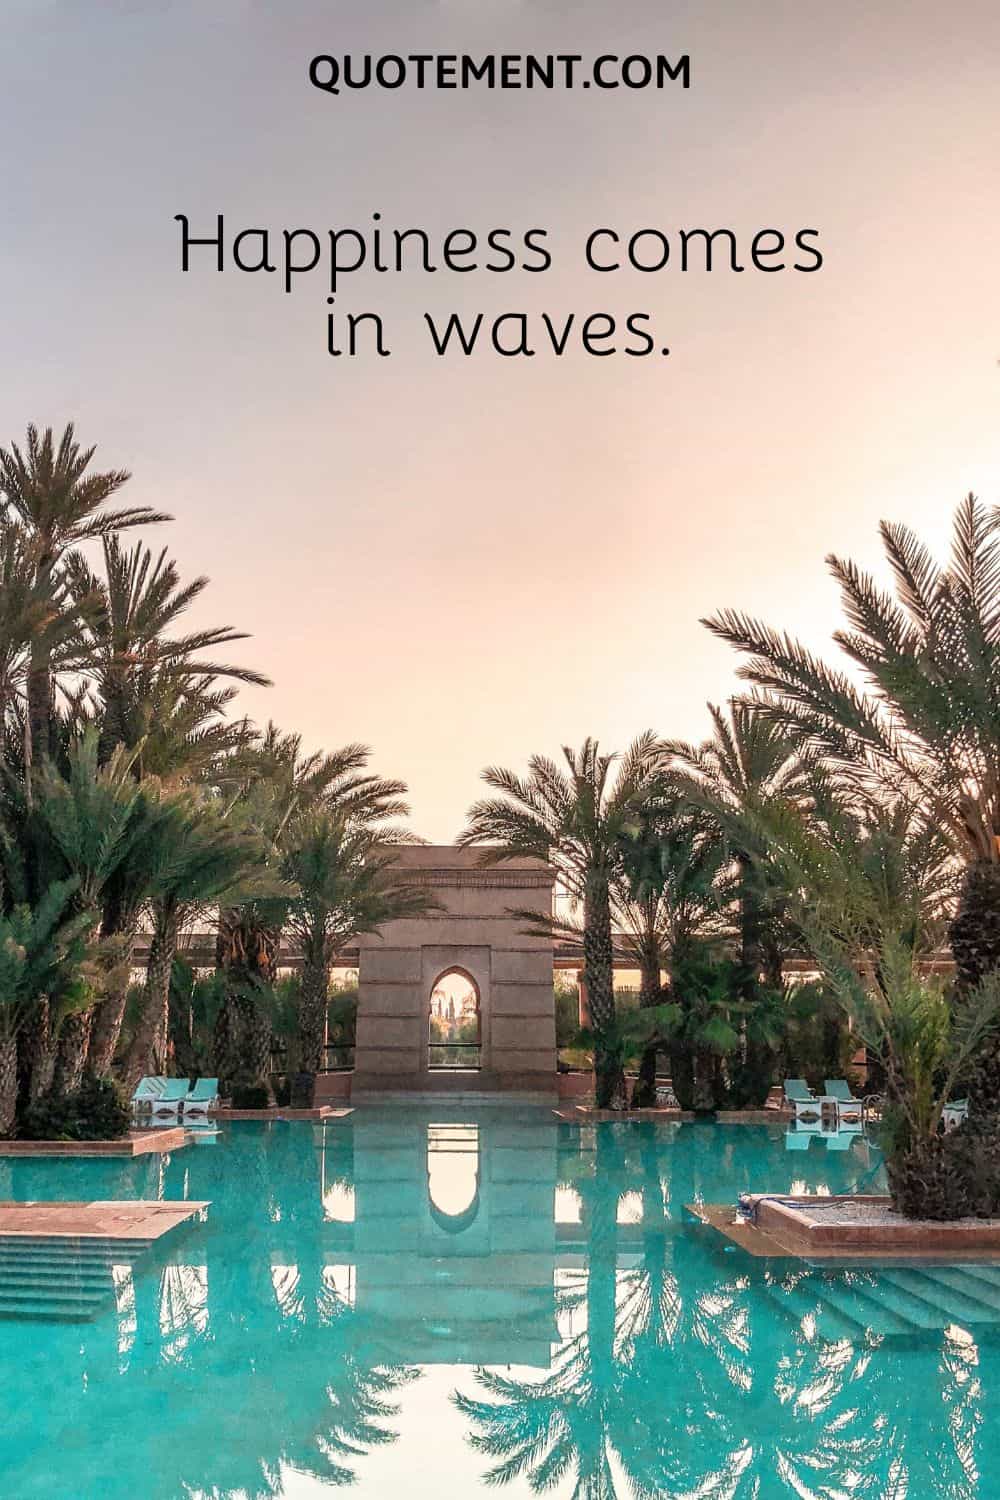 Happiness comes in waves.